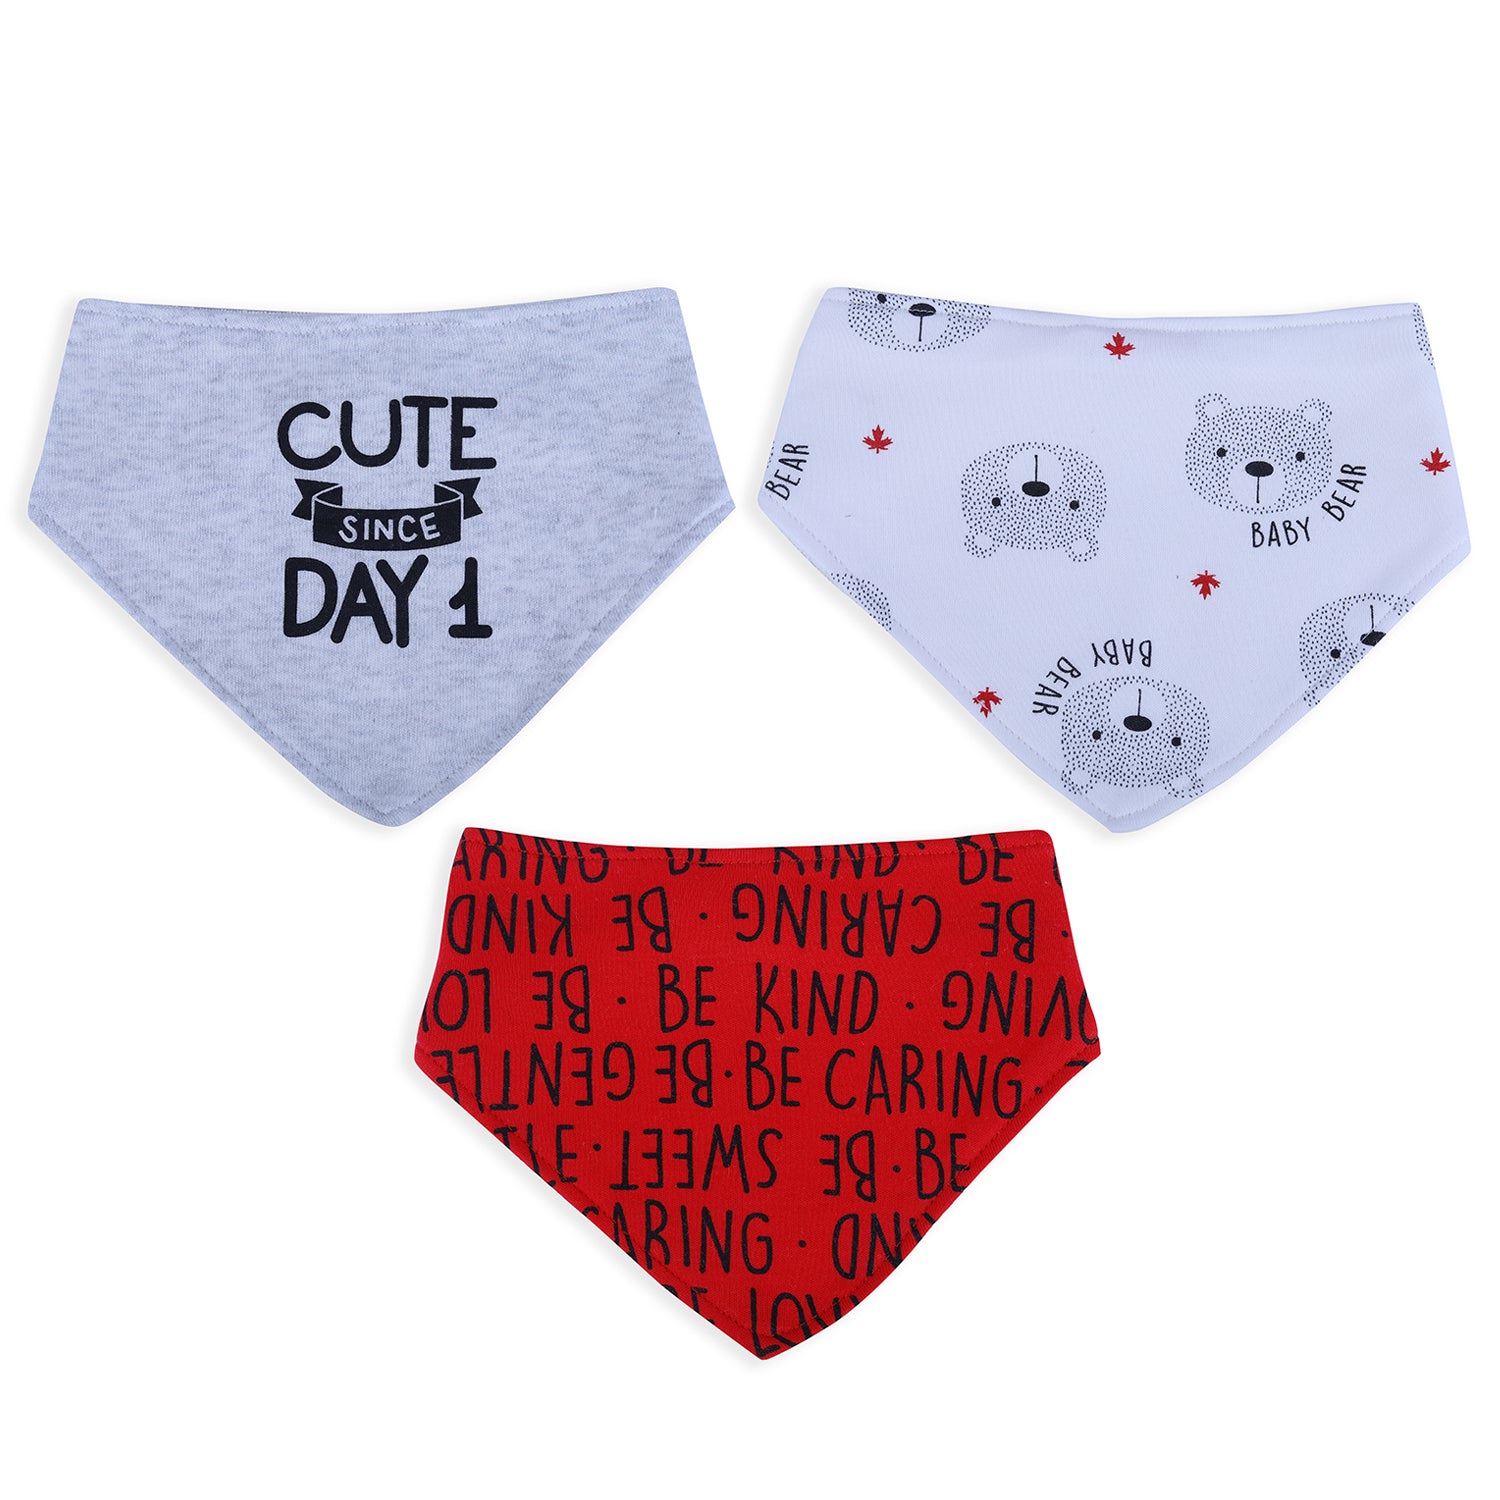 Baby Moo Cute Since Day 1 Cotton 3 Pack Bandana Bibs - Red - Baby Moo